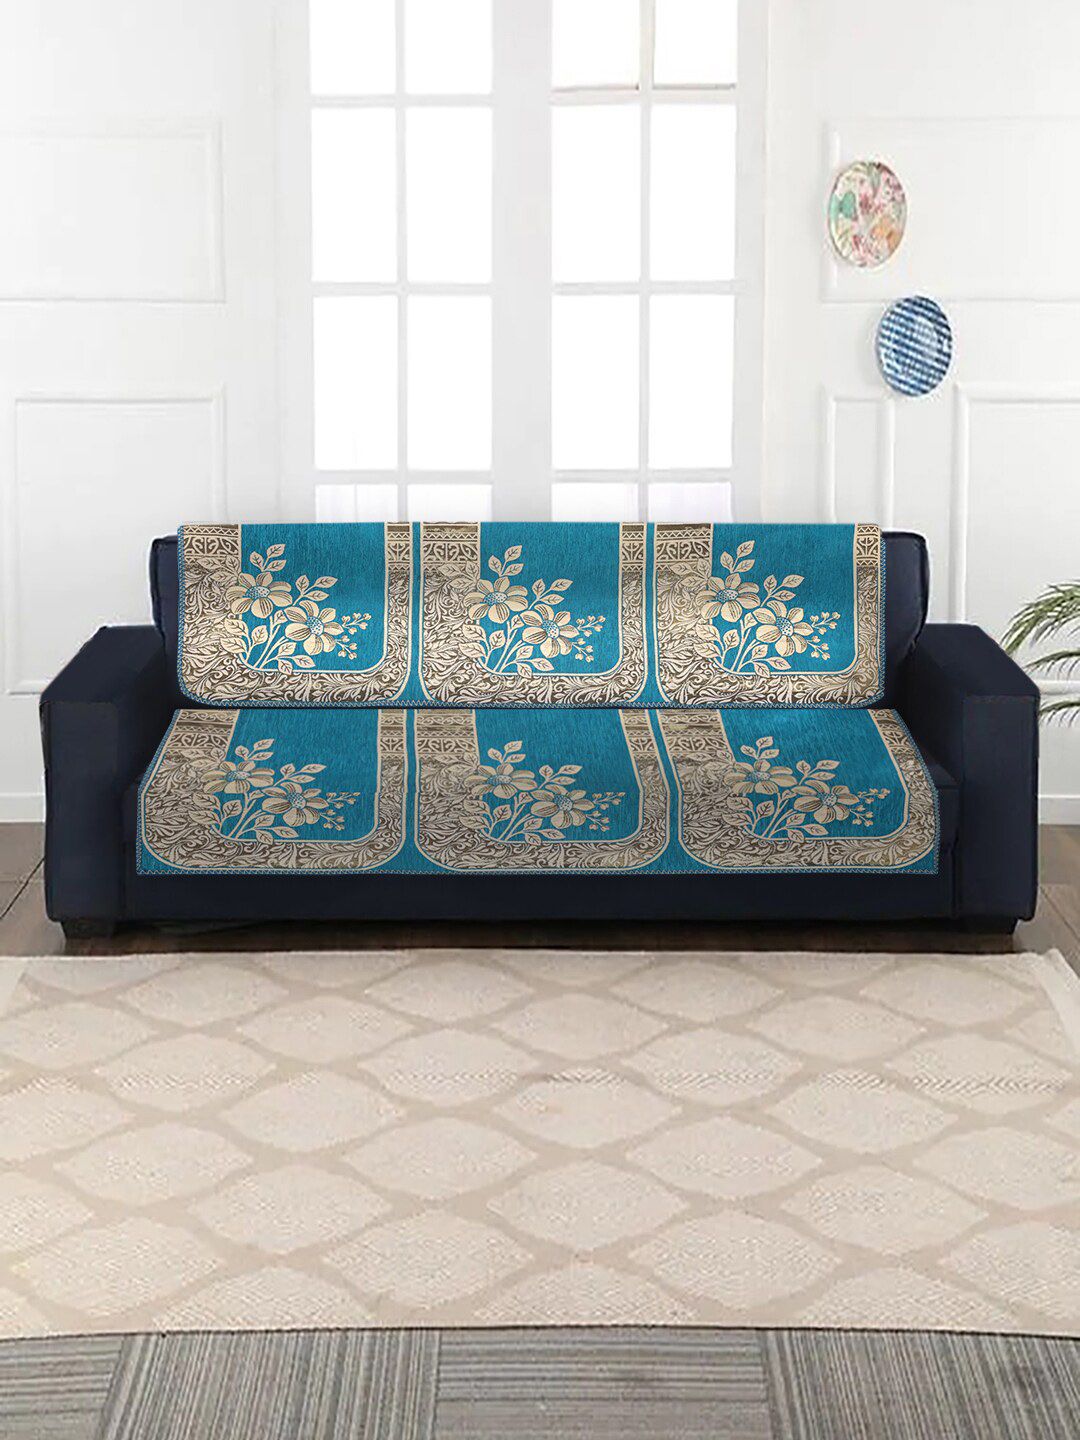 MULTITEX Set of 10 Blue & Beige Jacquard 5 Seater Sofa Covers Price in India